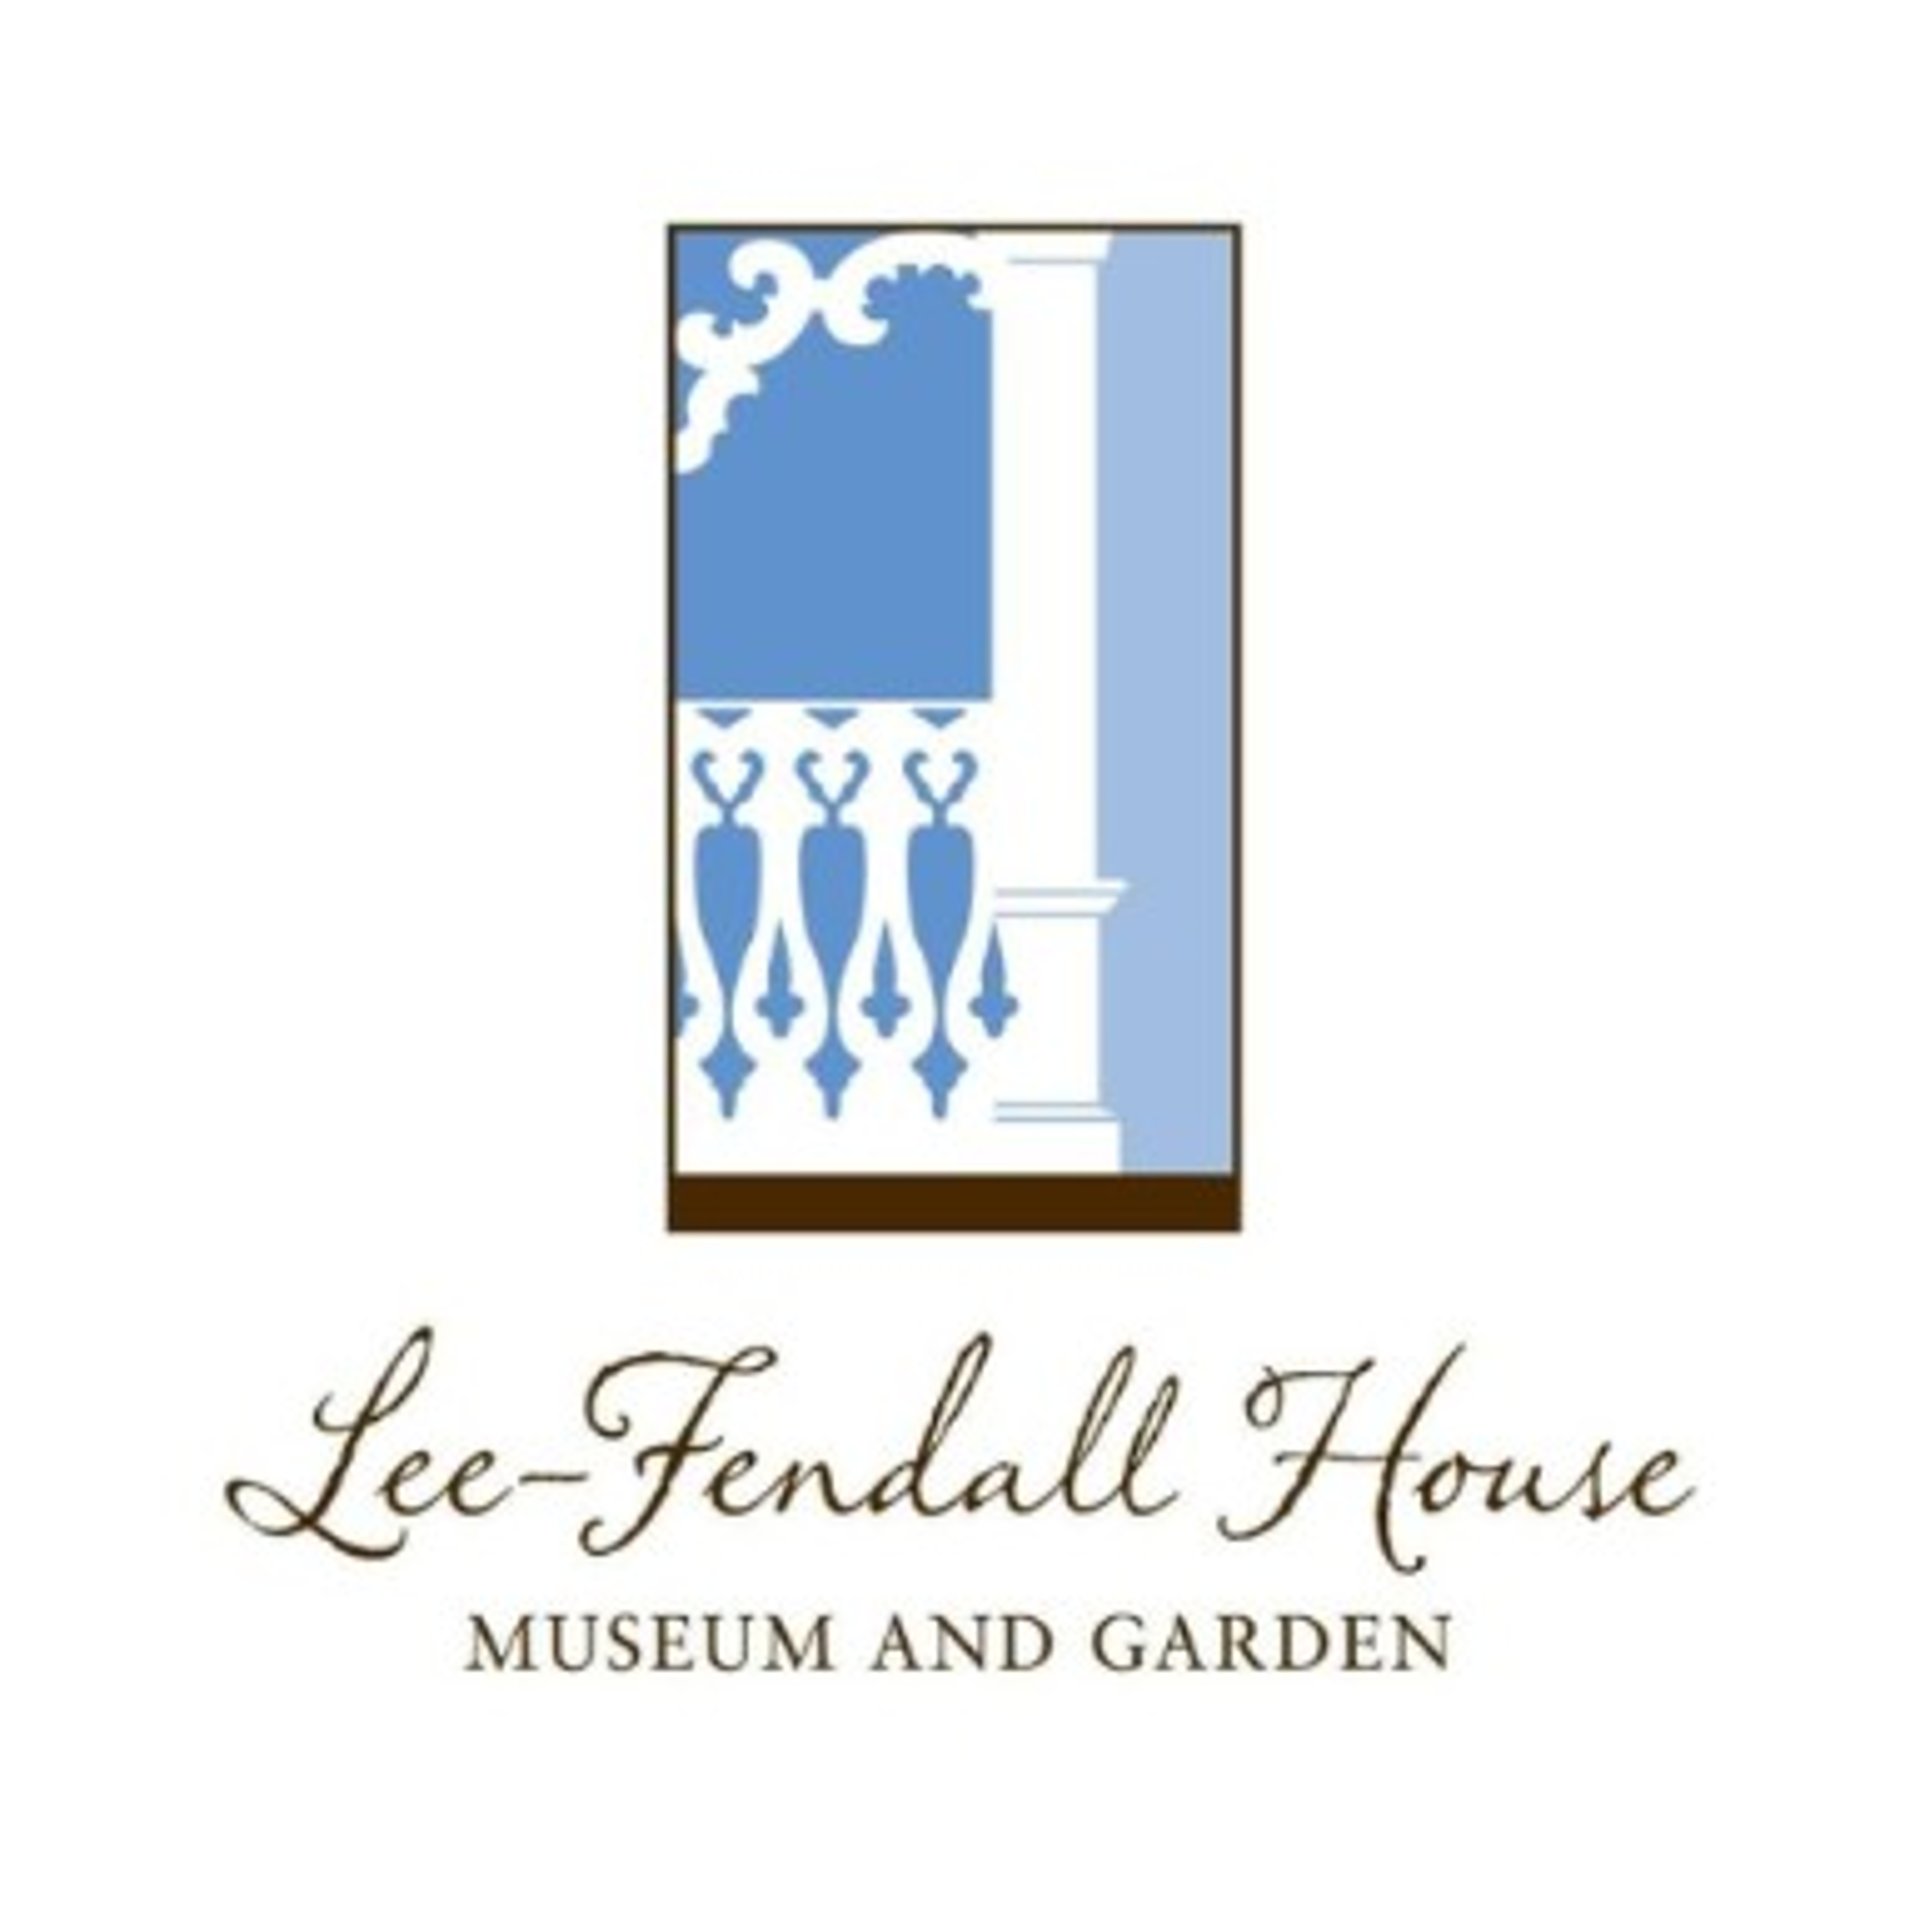 Lee-Fendall House Museum - The Museum Grounds - Museum / Gallery in  Alexandria, VA | The Vendry